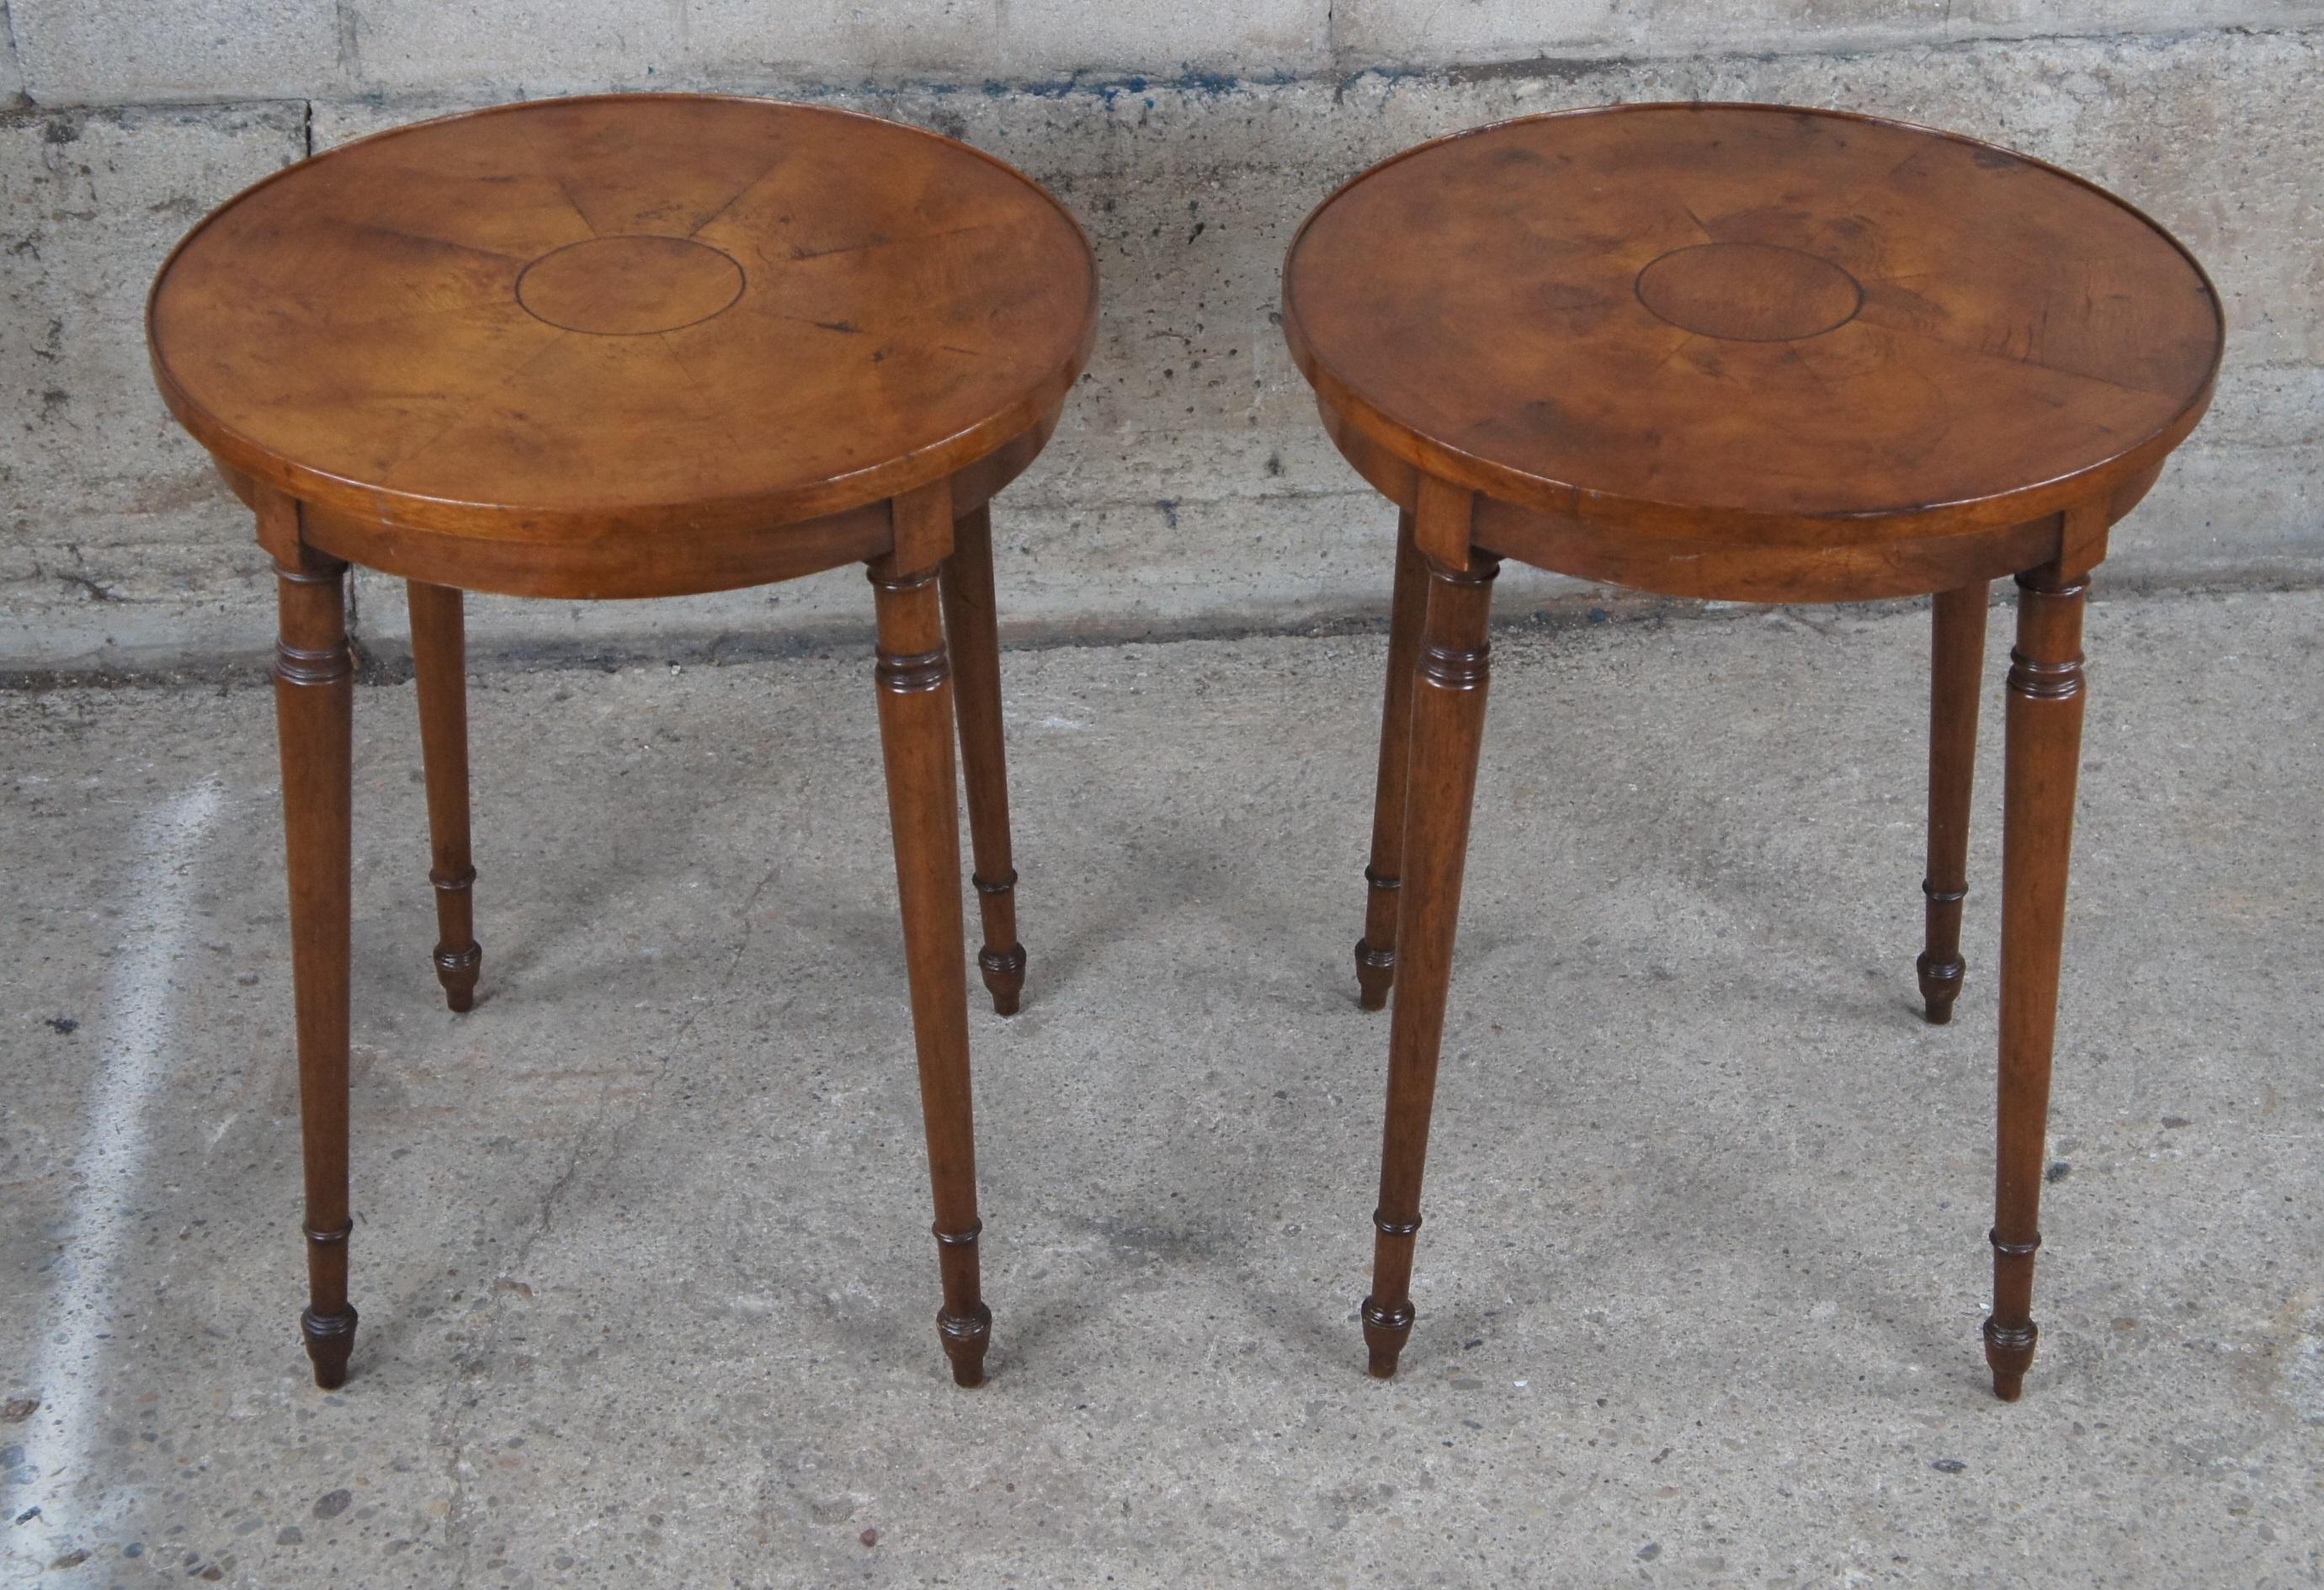 2 Victorian Revival Old Colony Furniture Walnut Burl Round Spindle Leg Tables 8